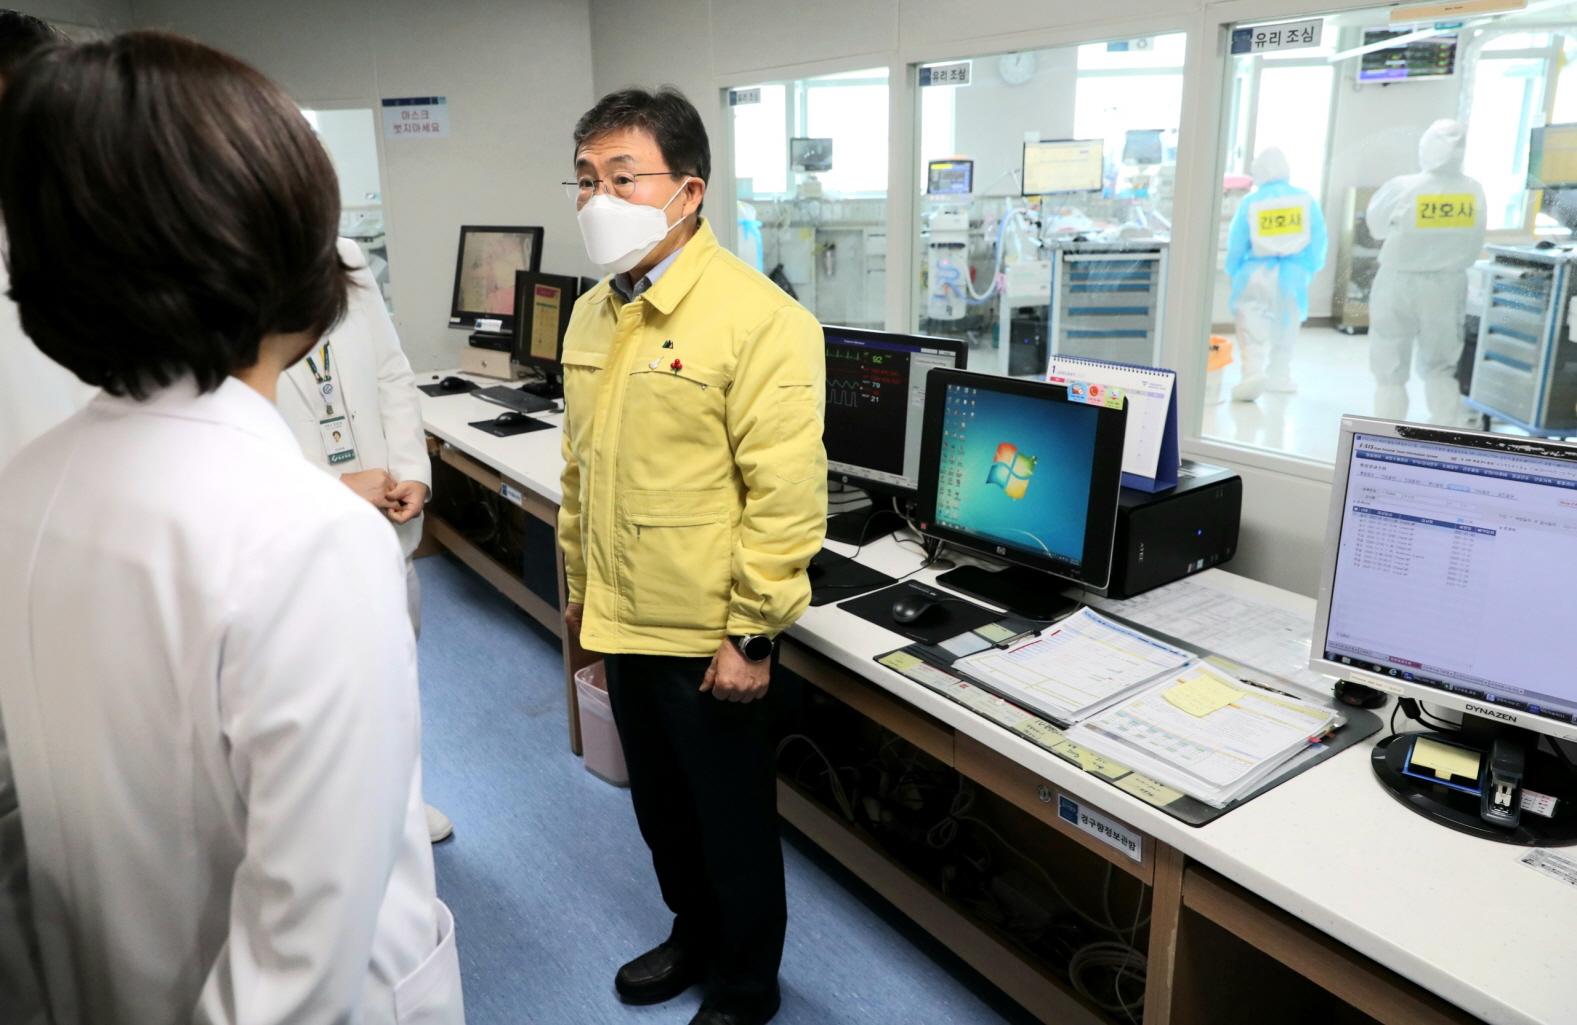 Minister Kwon Checks Hospital Networks in North Gyeonggi for COVID-19 Treatment (January 3) 사진11